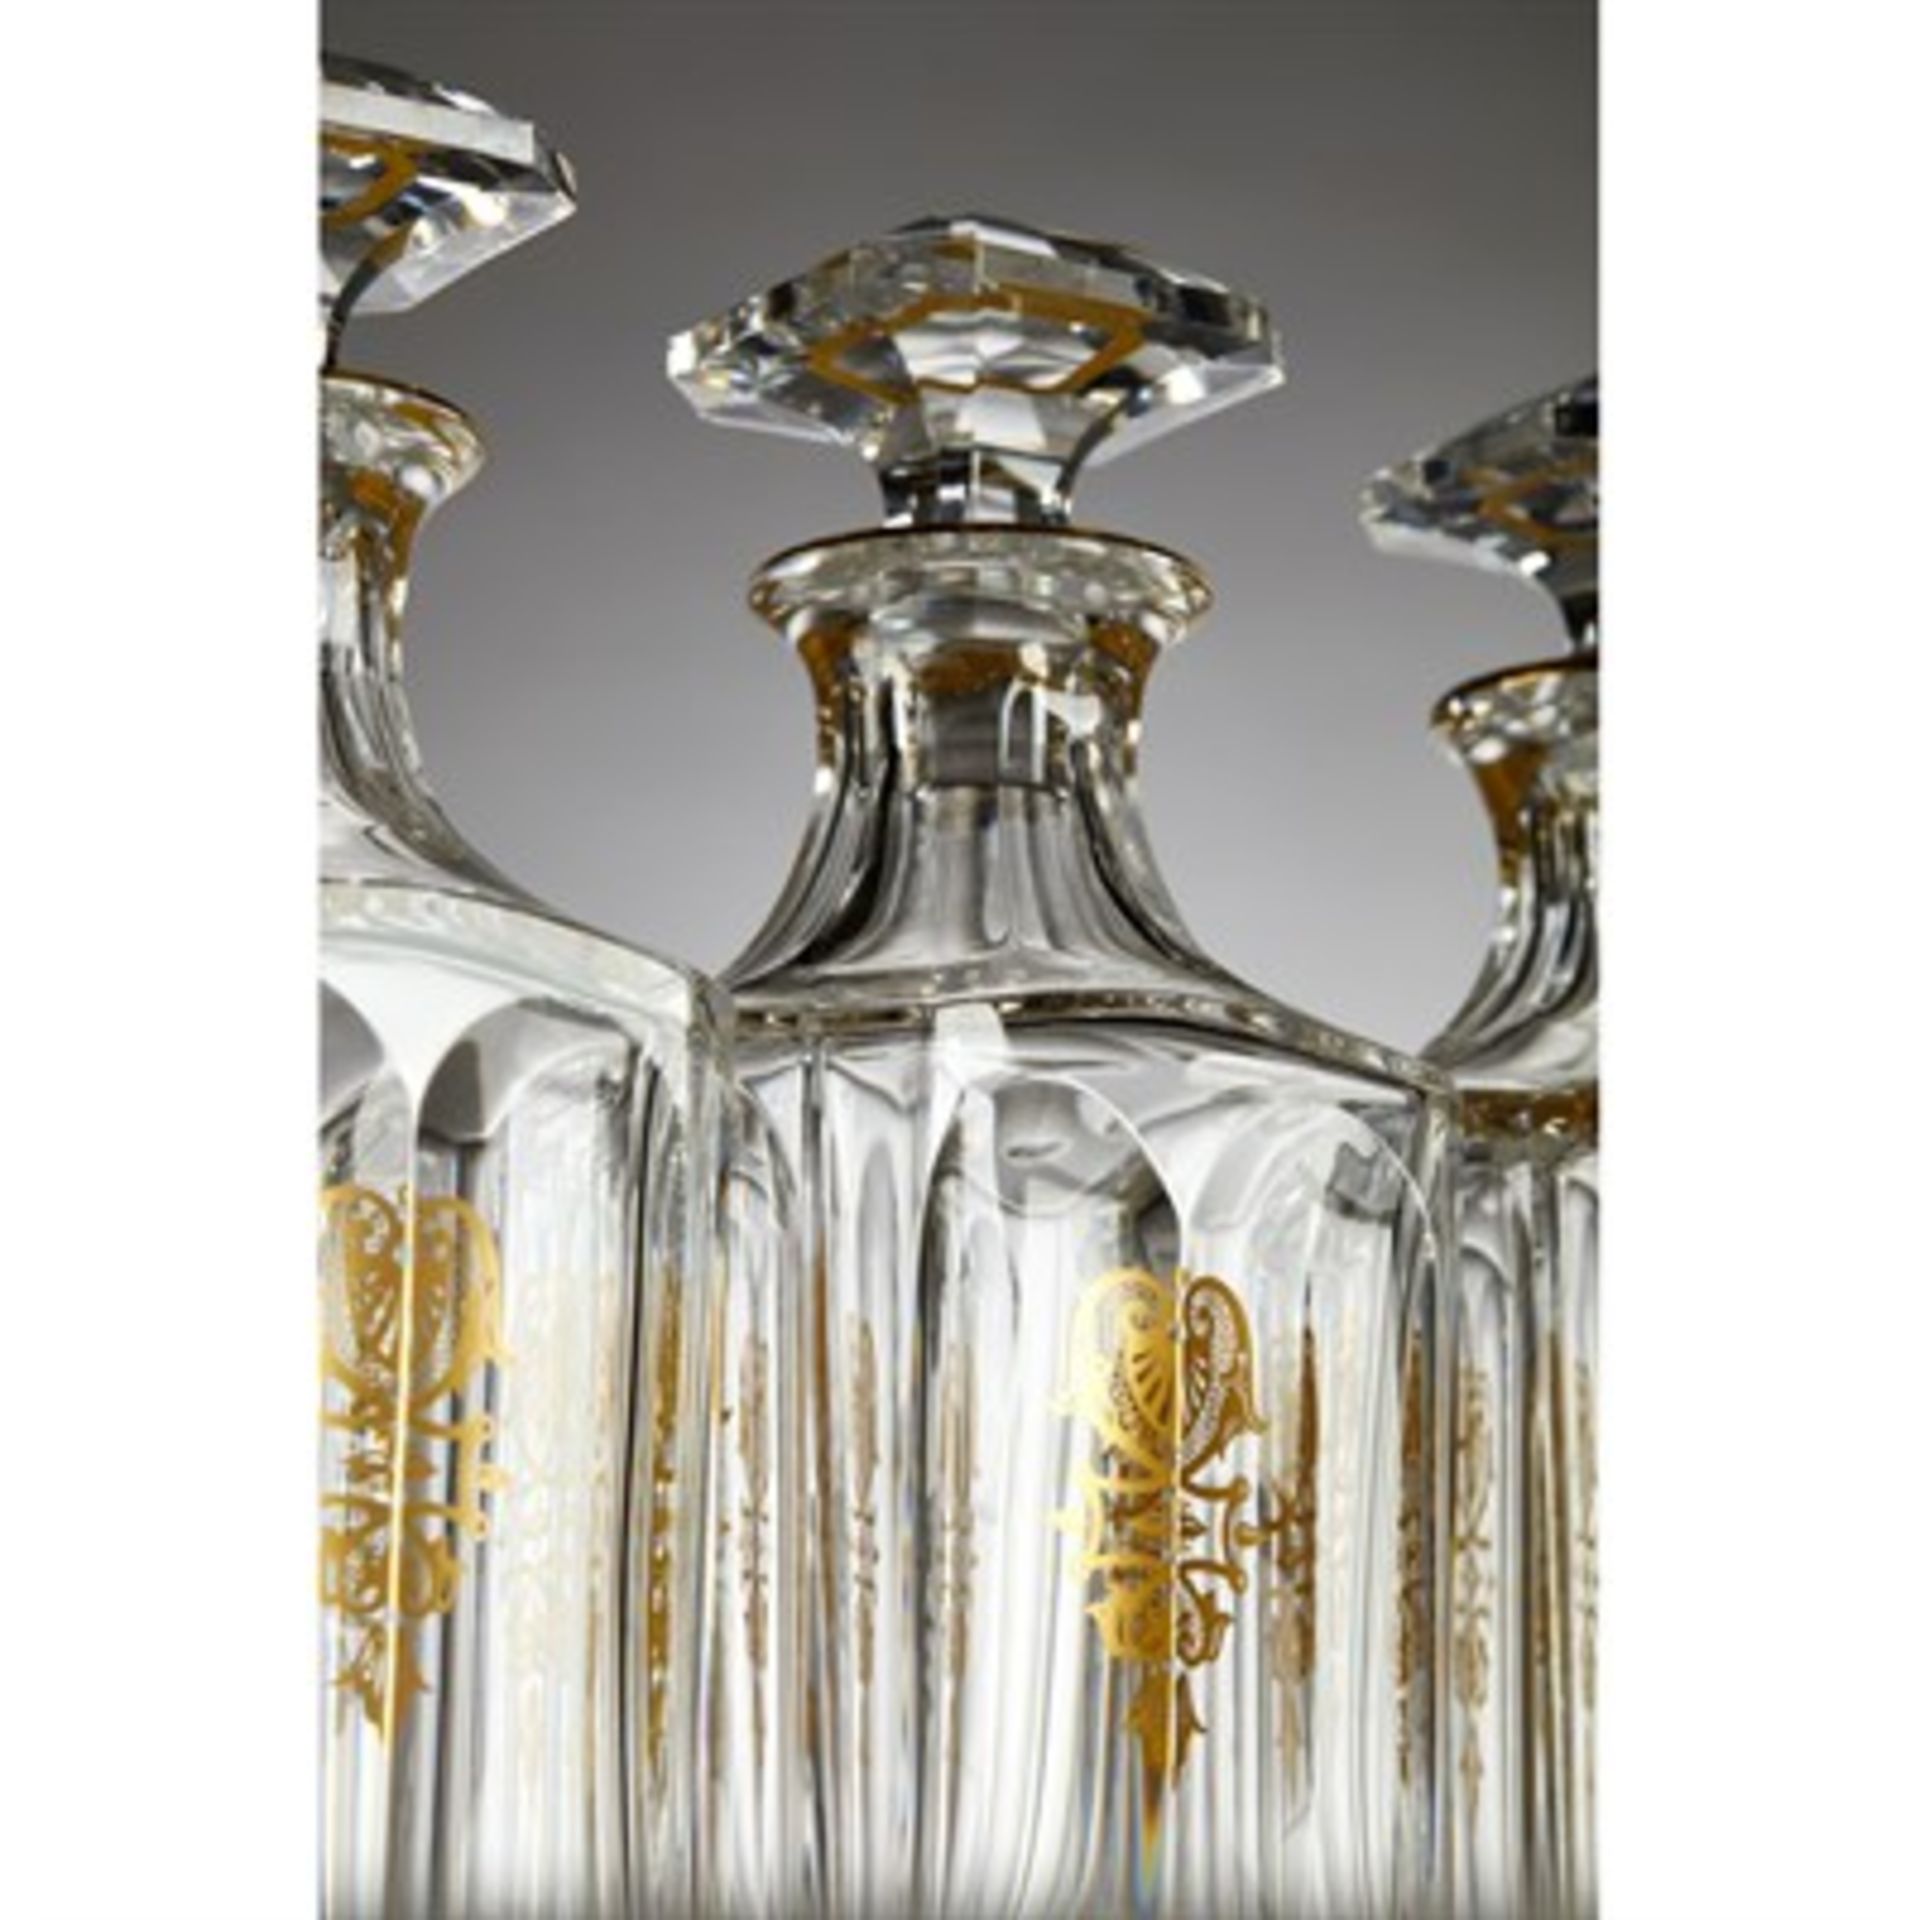 PART SUITE OF BACCARAT 'HARCOURT EMPIRE' GLASS 20TH CENTURY decorated in gilt with repeating - Image 3 of 3